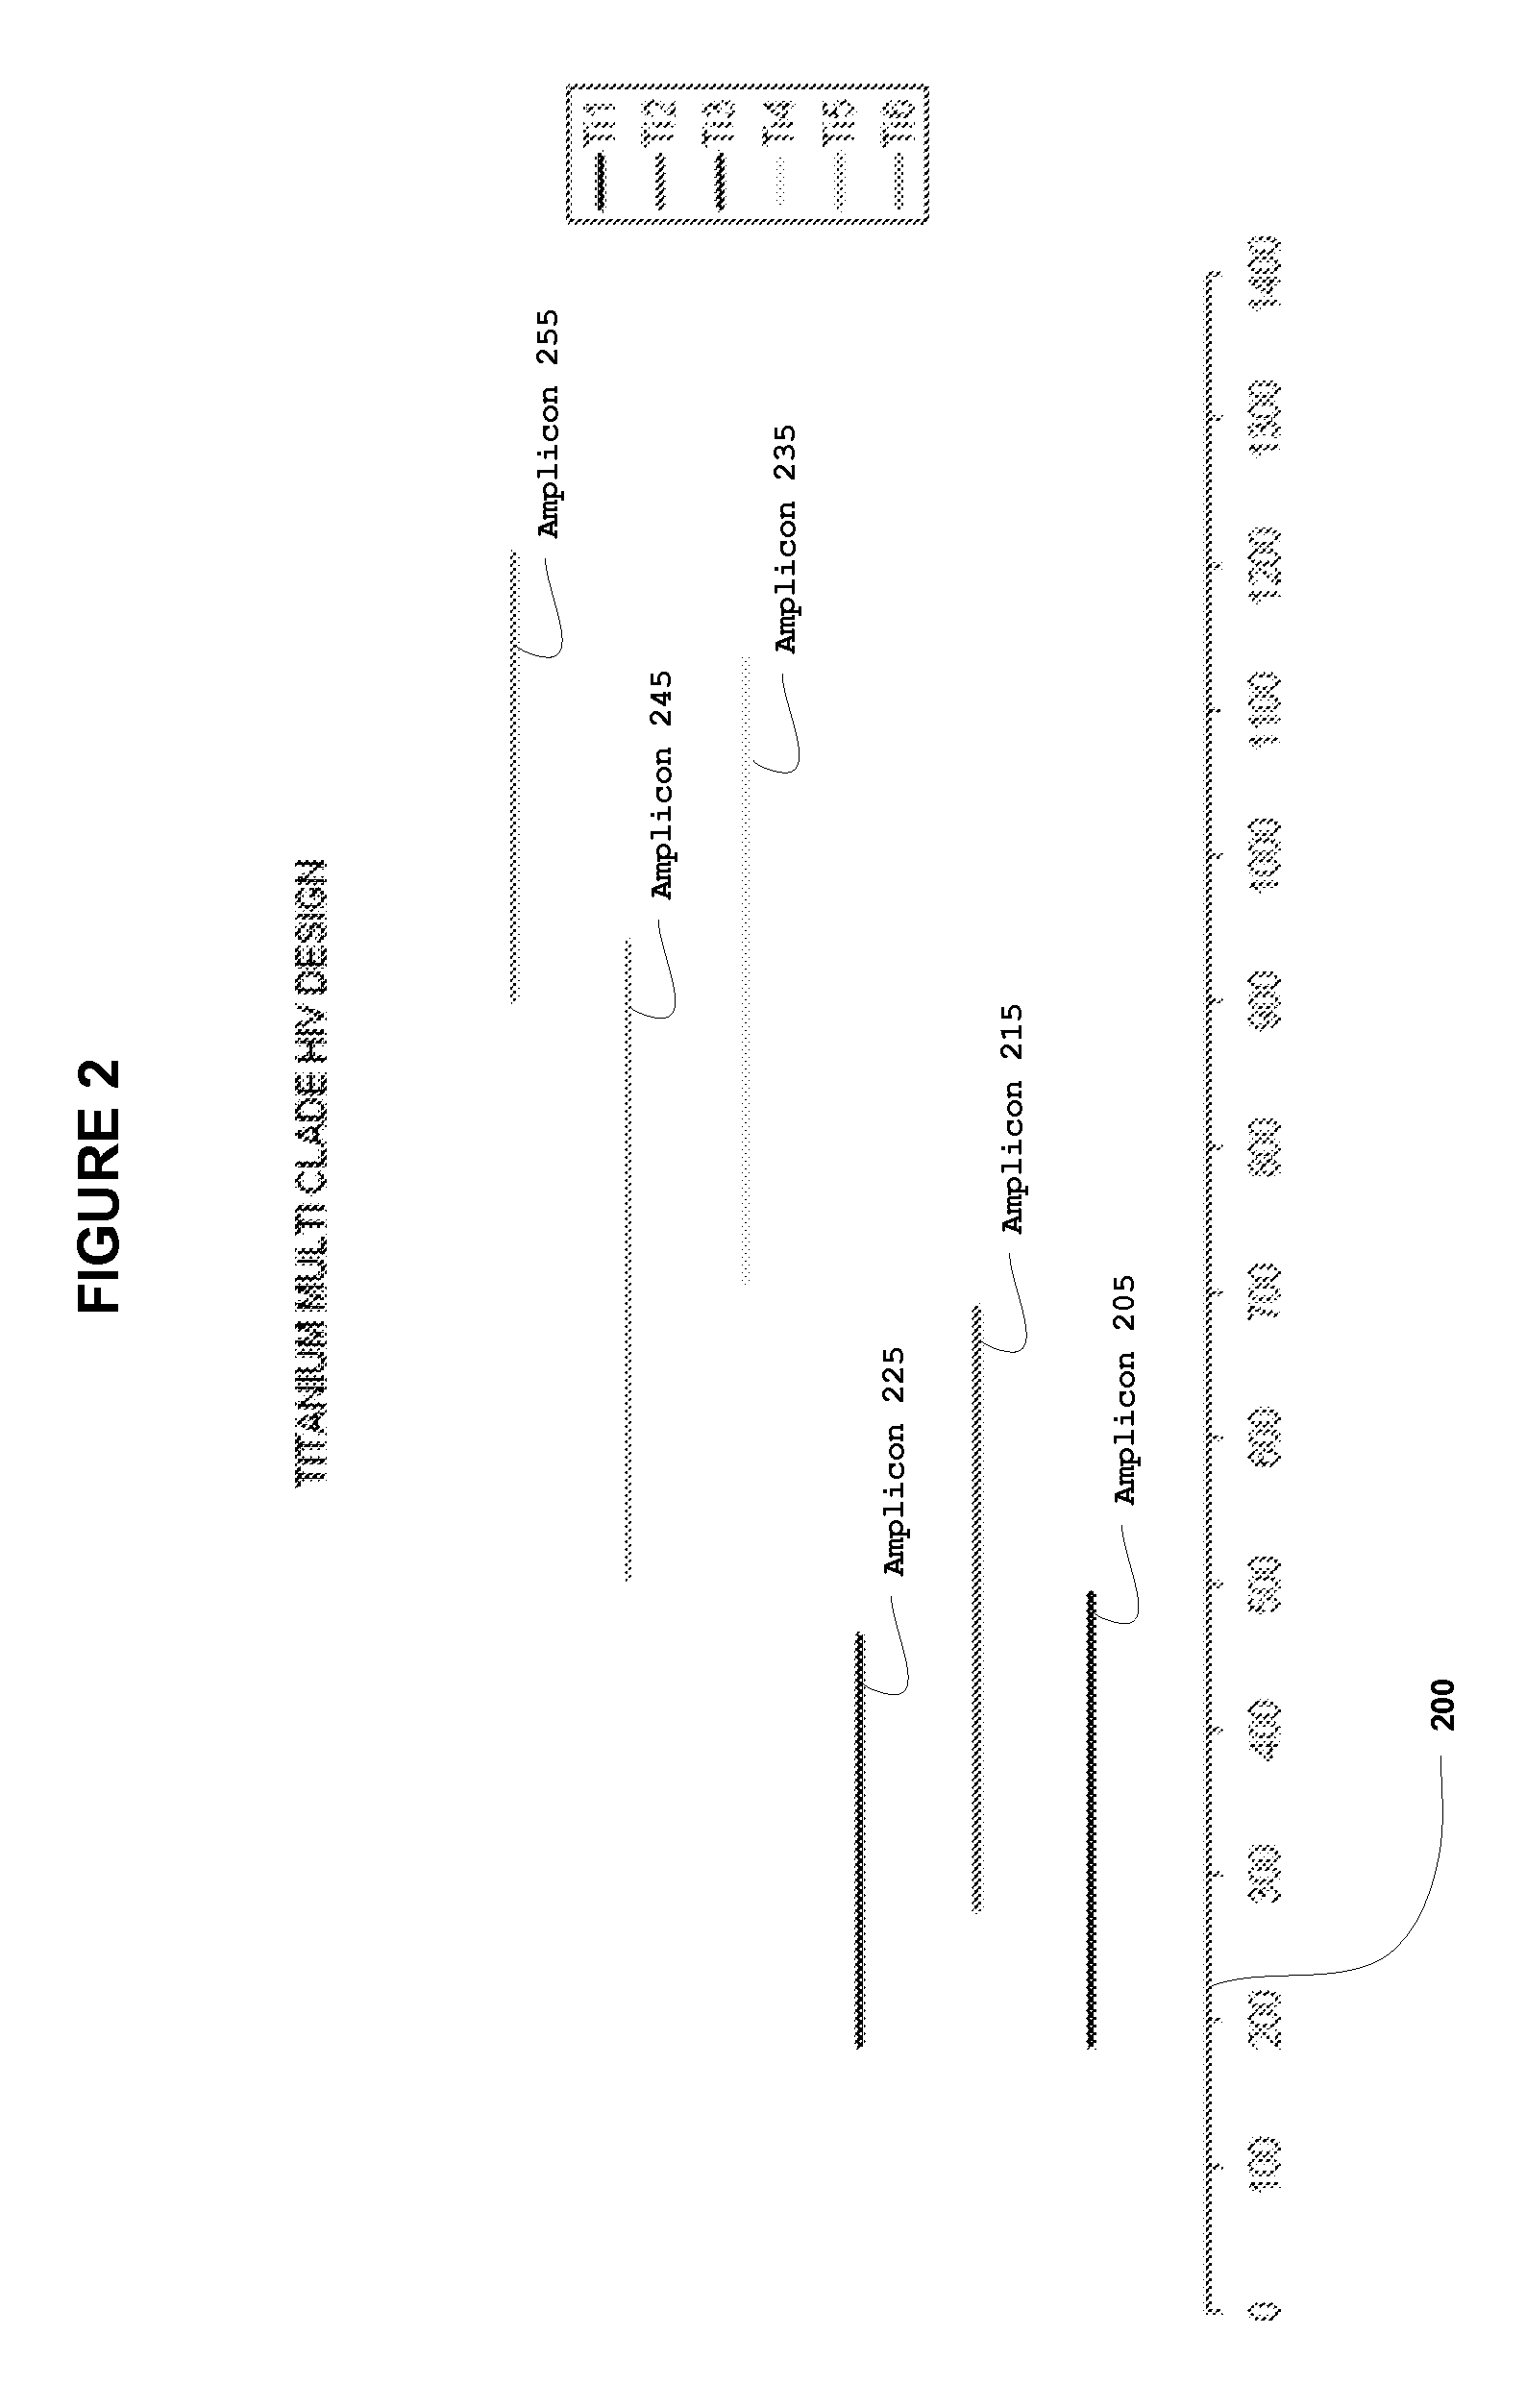 System and method for detection of hiv-1 clades and recombinants of the reverse transcriptase and protease regions